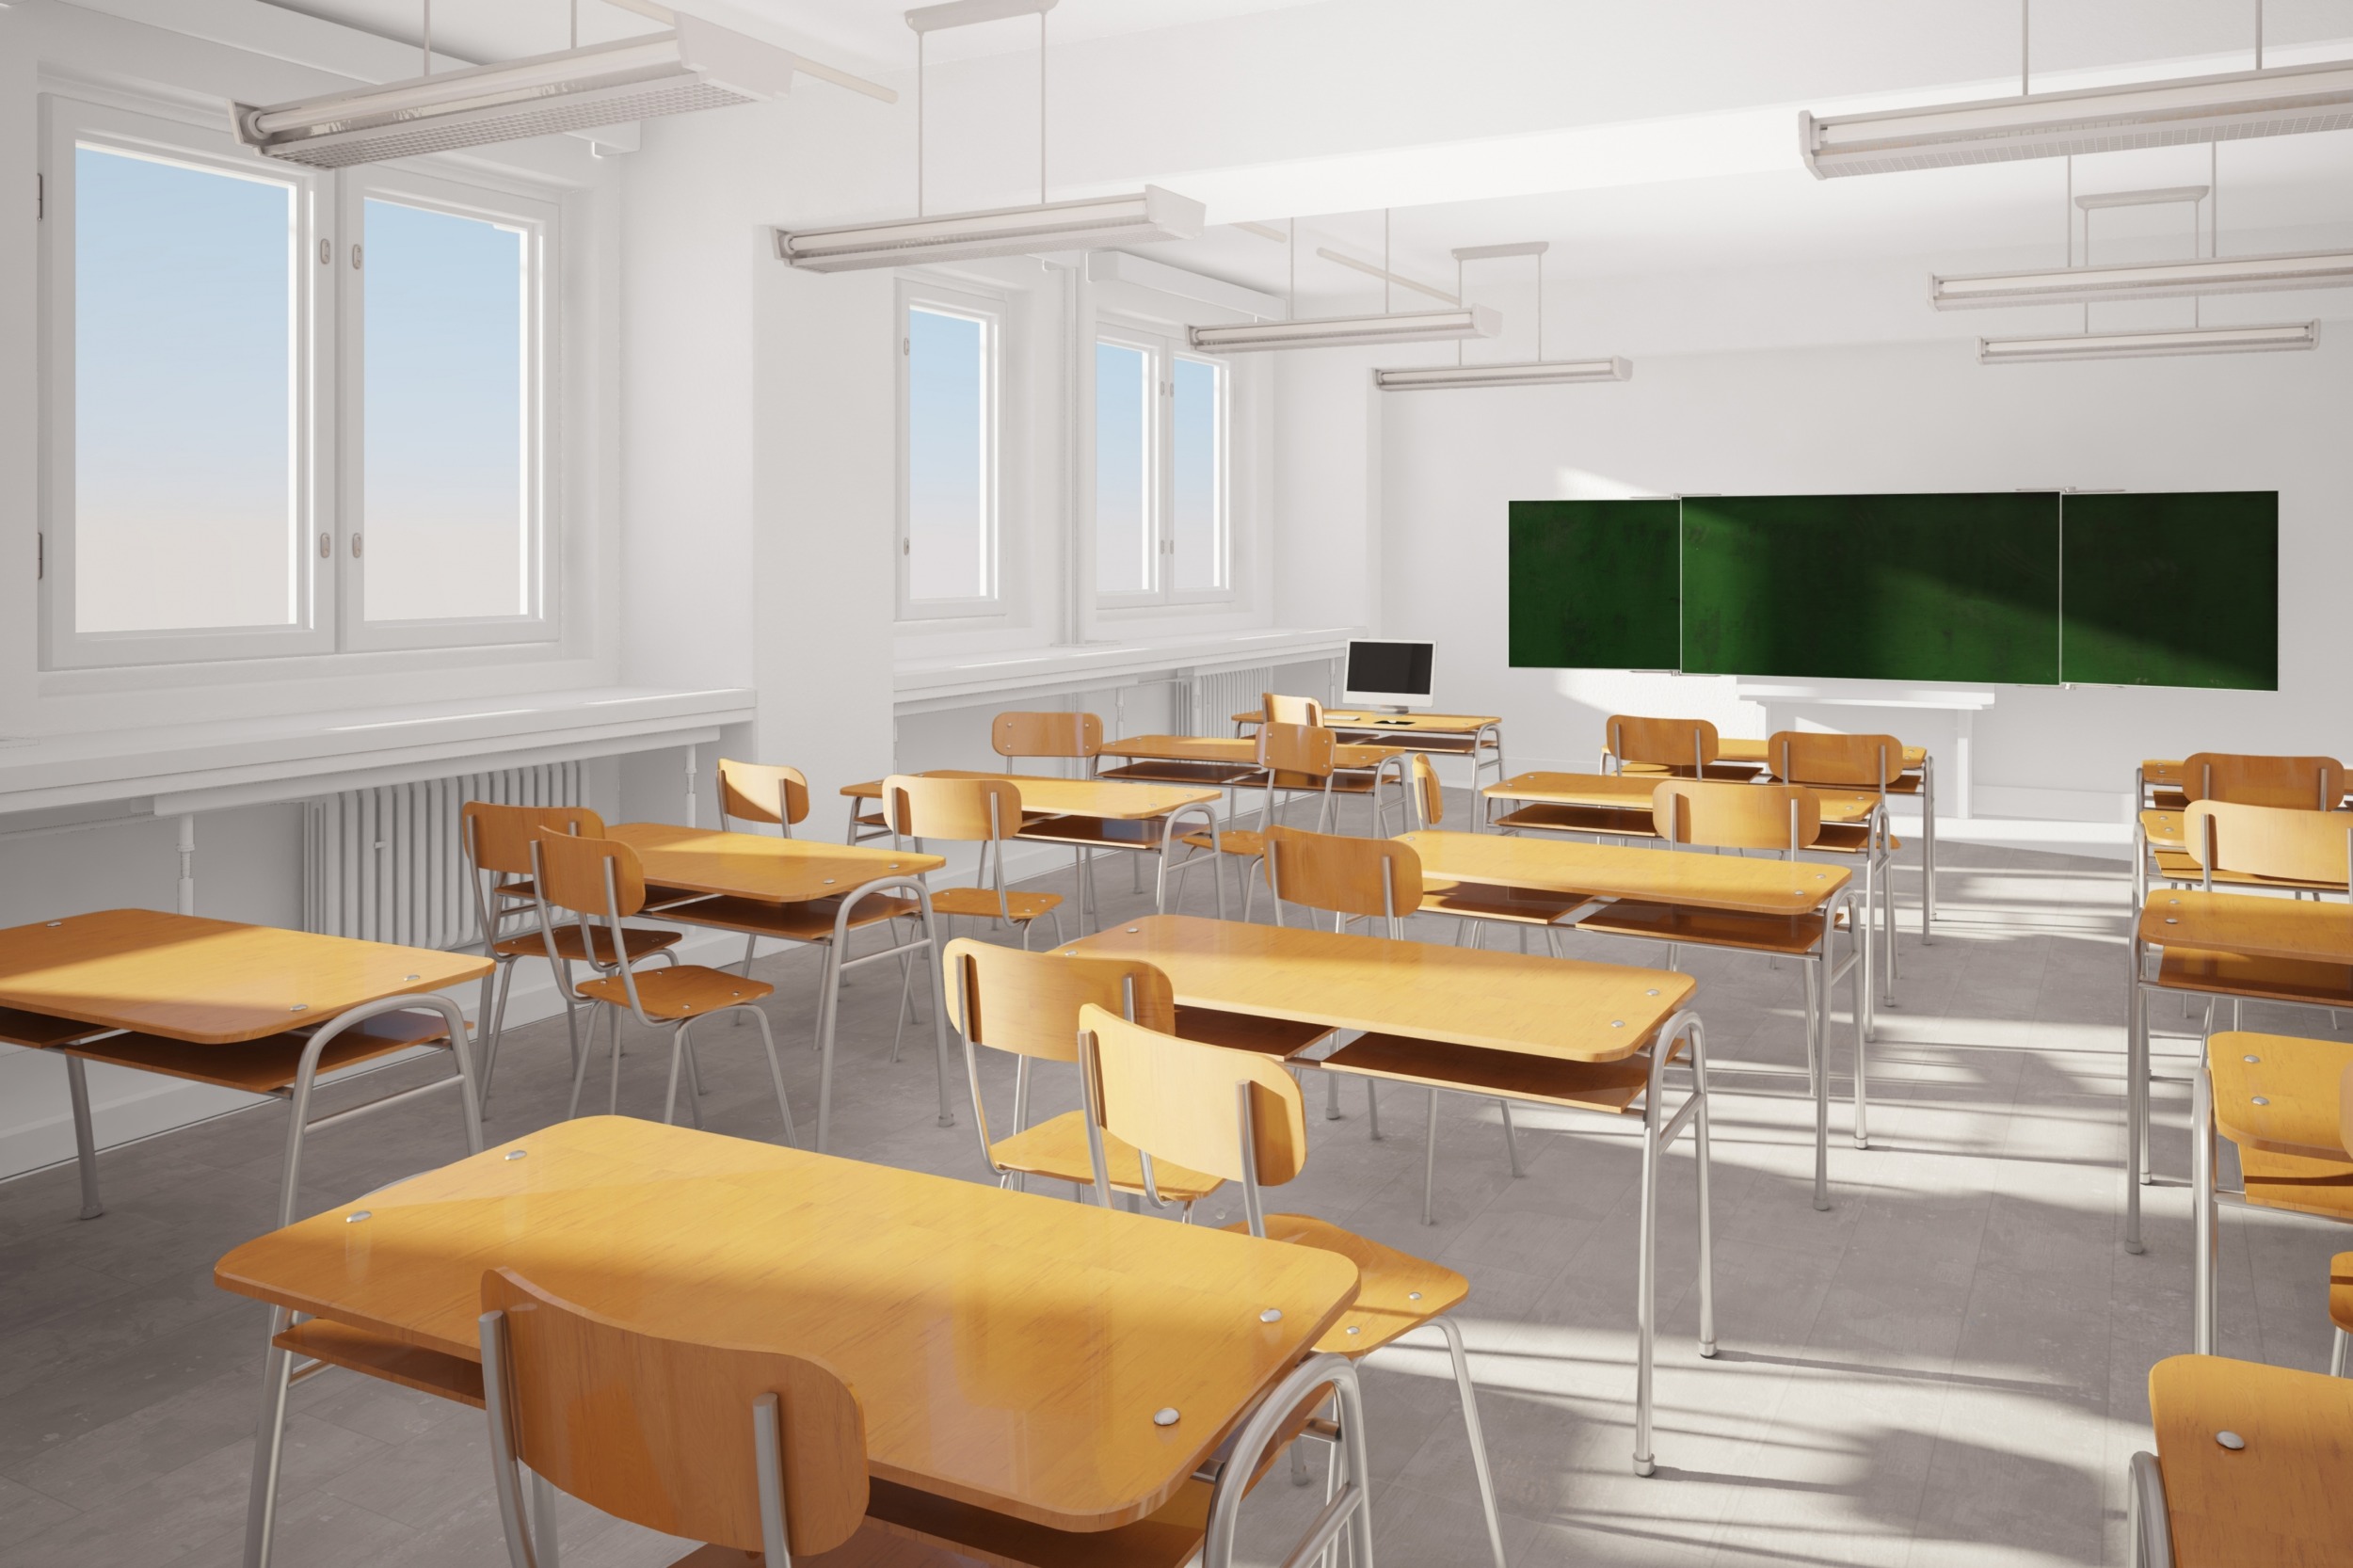 Louisiana school funding: Empty white classroom with rows of light wood desks and chairs facing a blackboard.